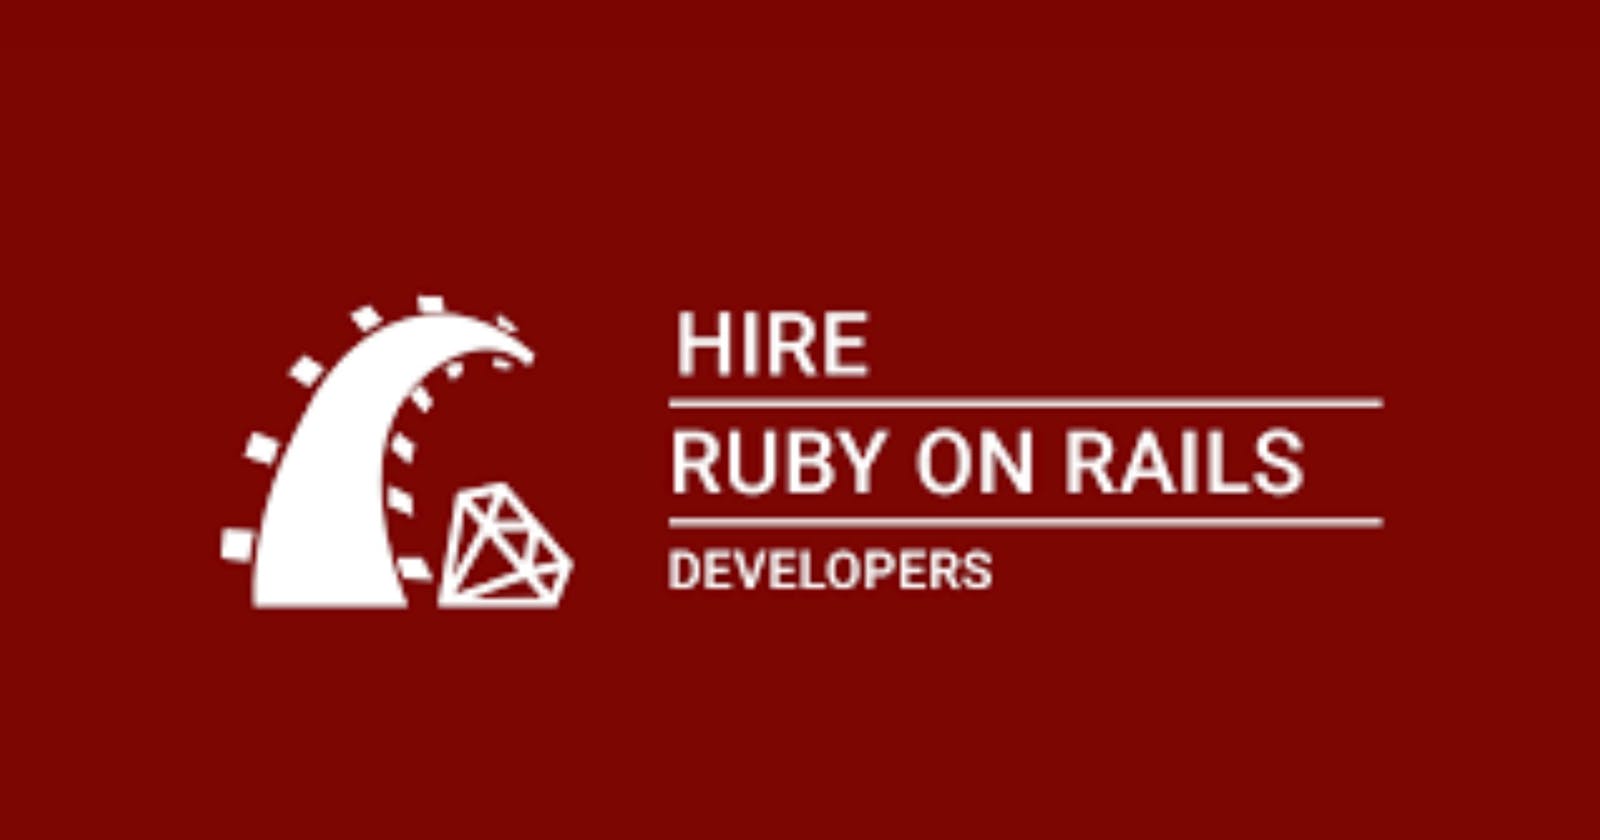 Need Ruby on Rails Talent? Hire Ruby on Rails Developers Today!